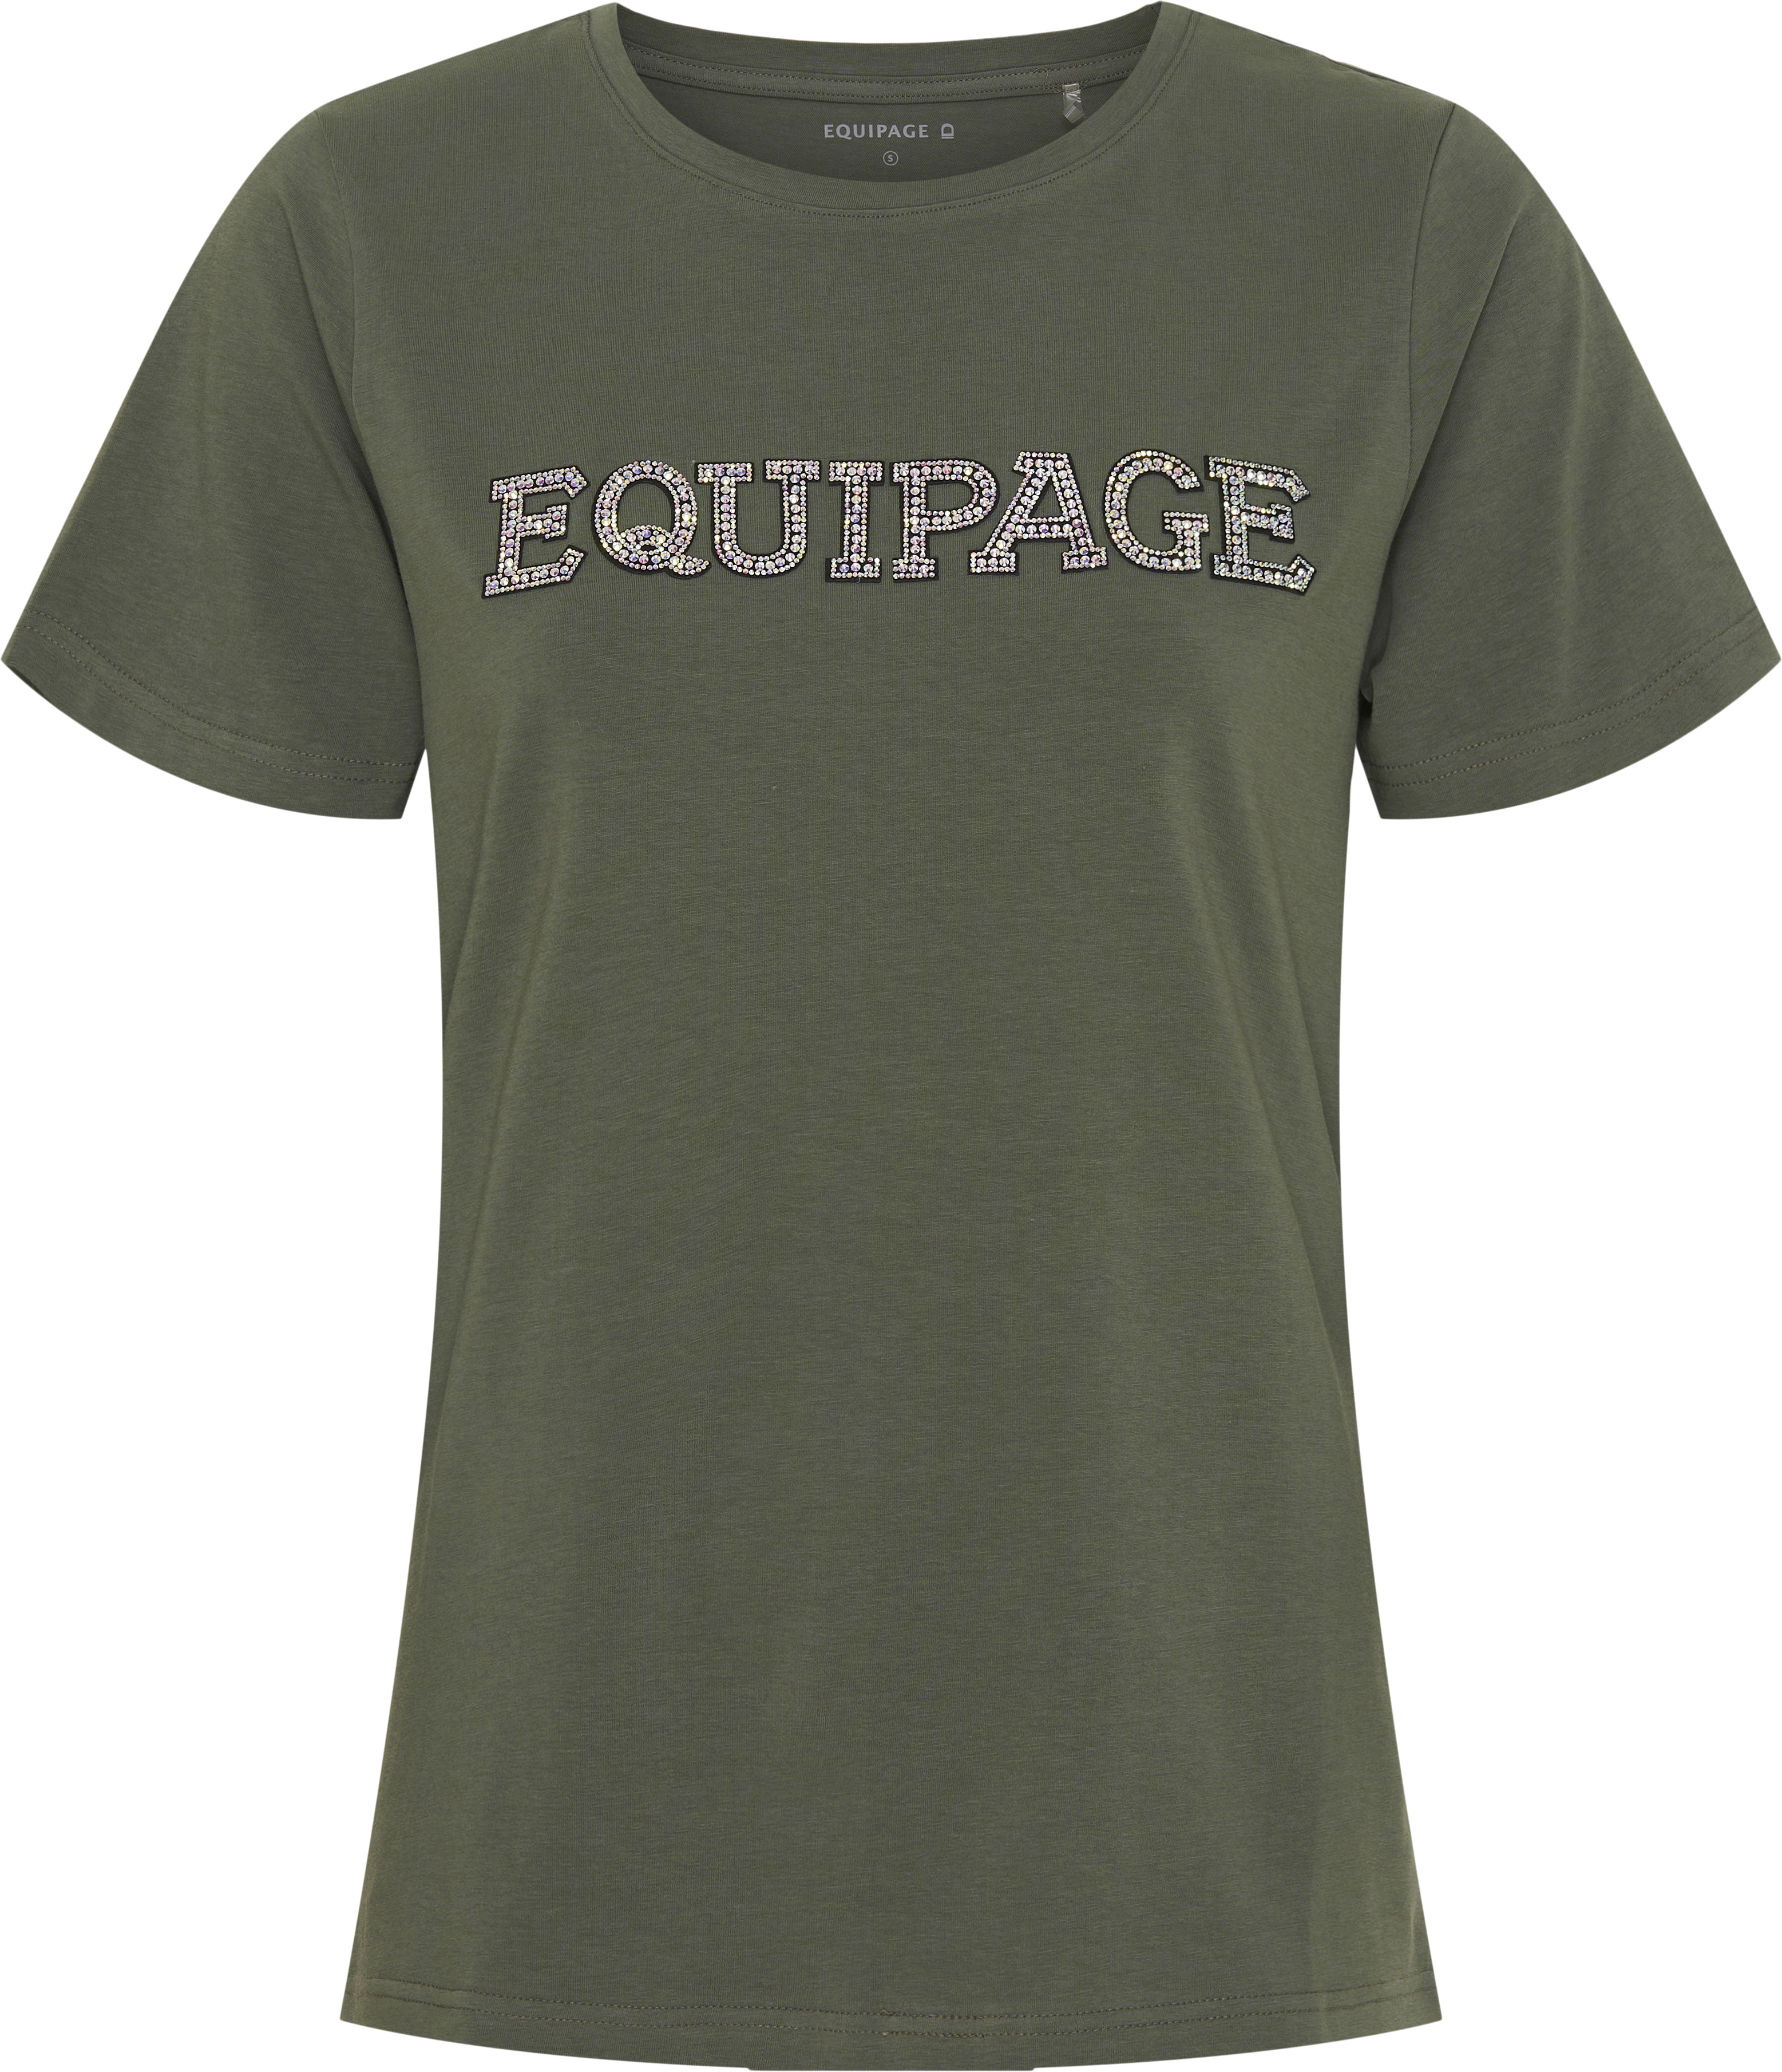 Equipage Melina T-Shirt - Forest (164)